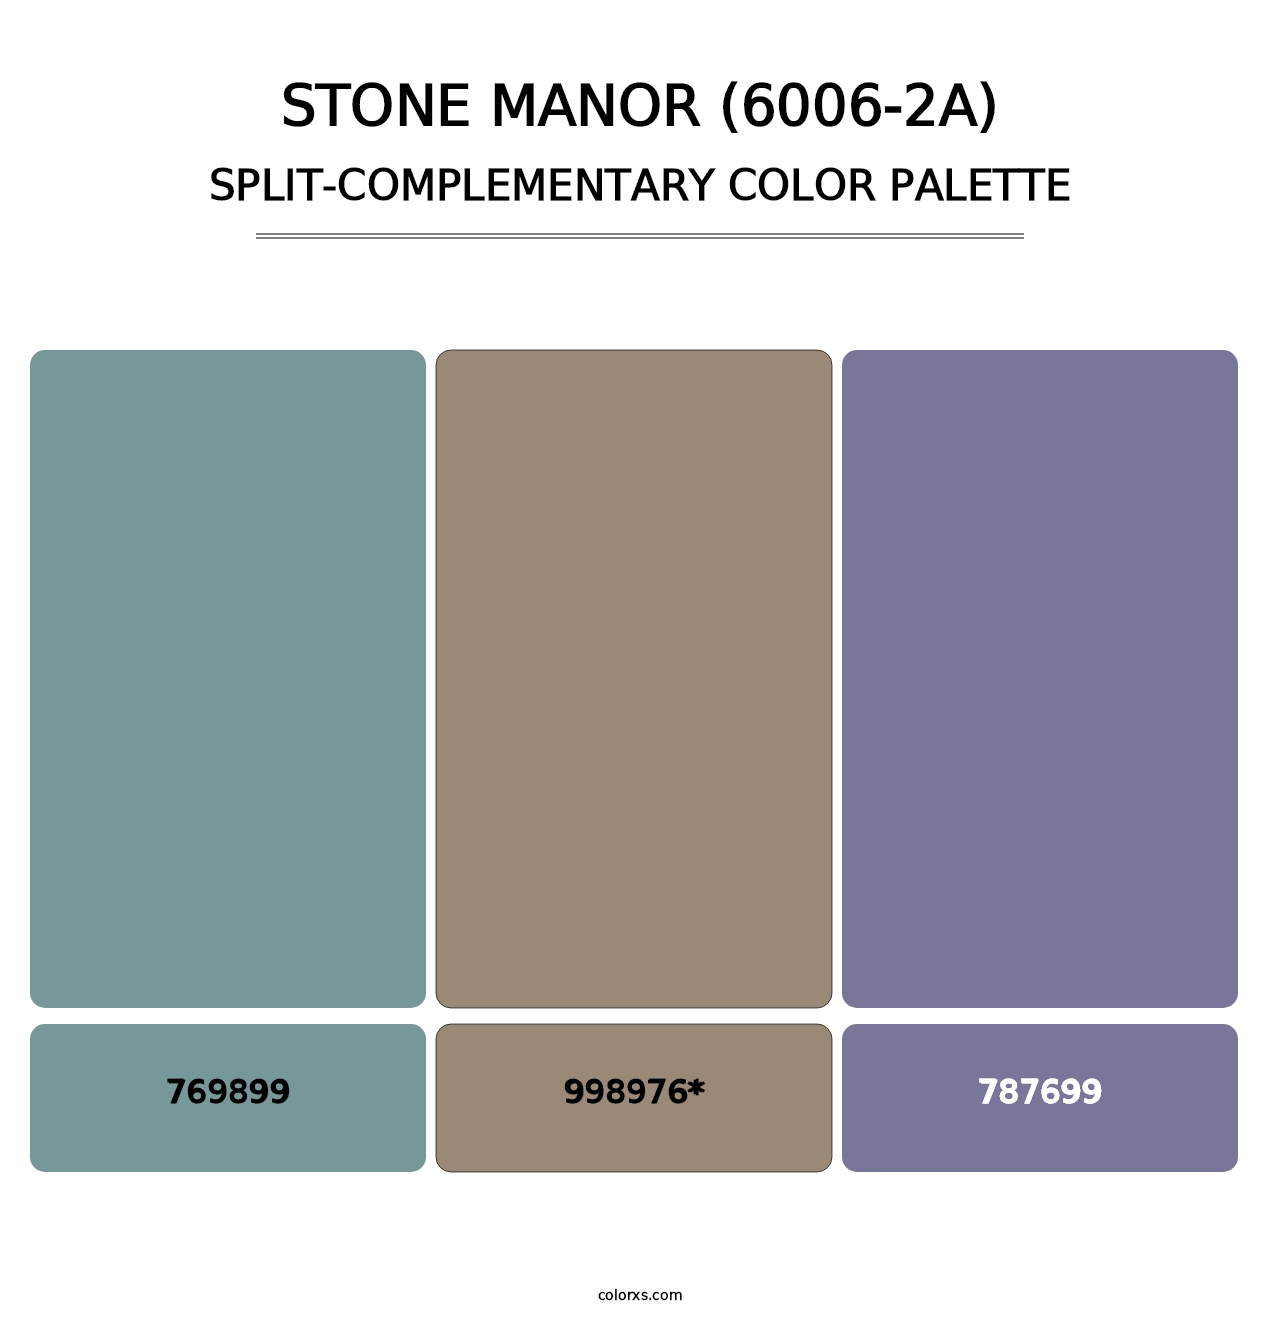 Stone Manor (6006-2A) - Split-Complementary Color Palette